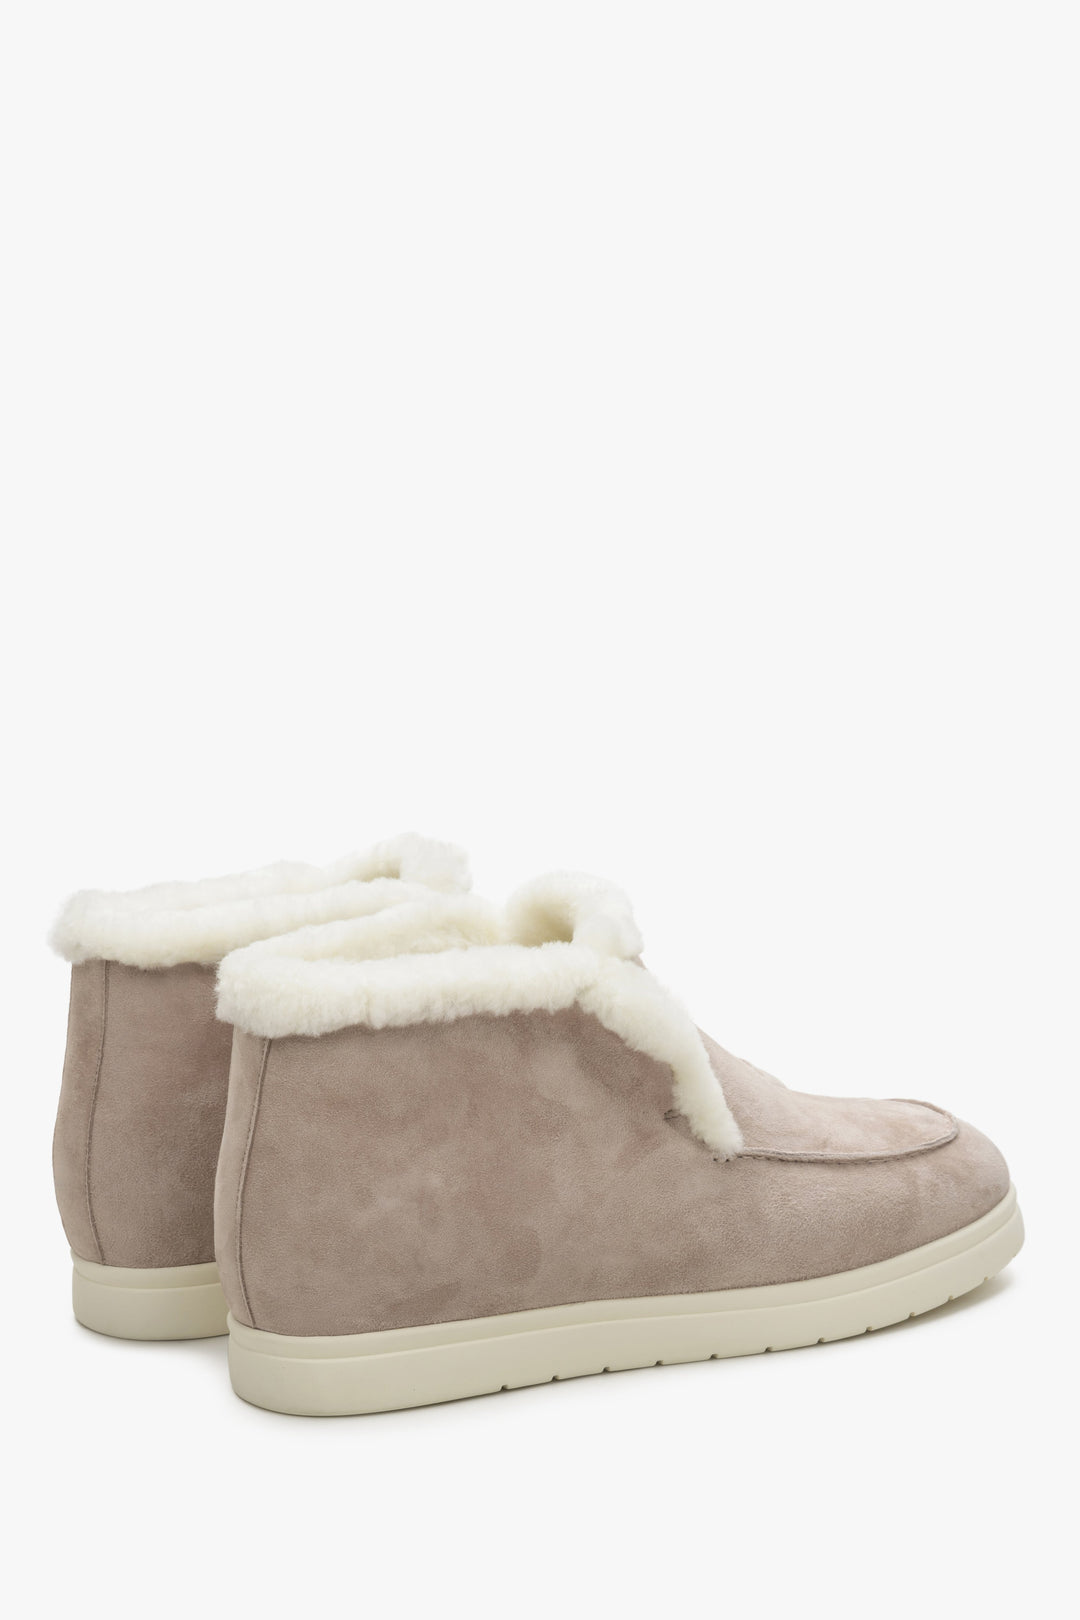 Slip on low-top boots in pale pink colour made of velour and fur.